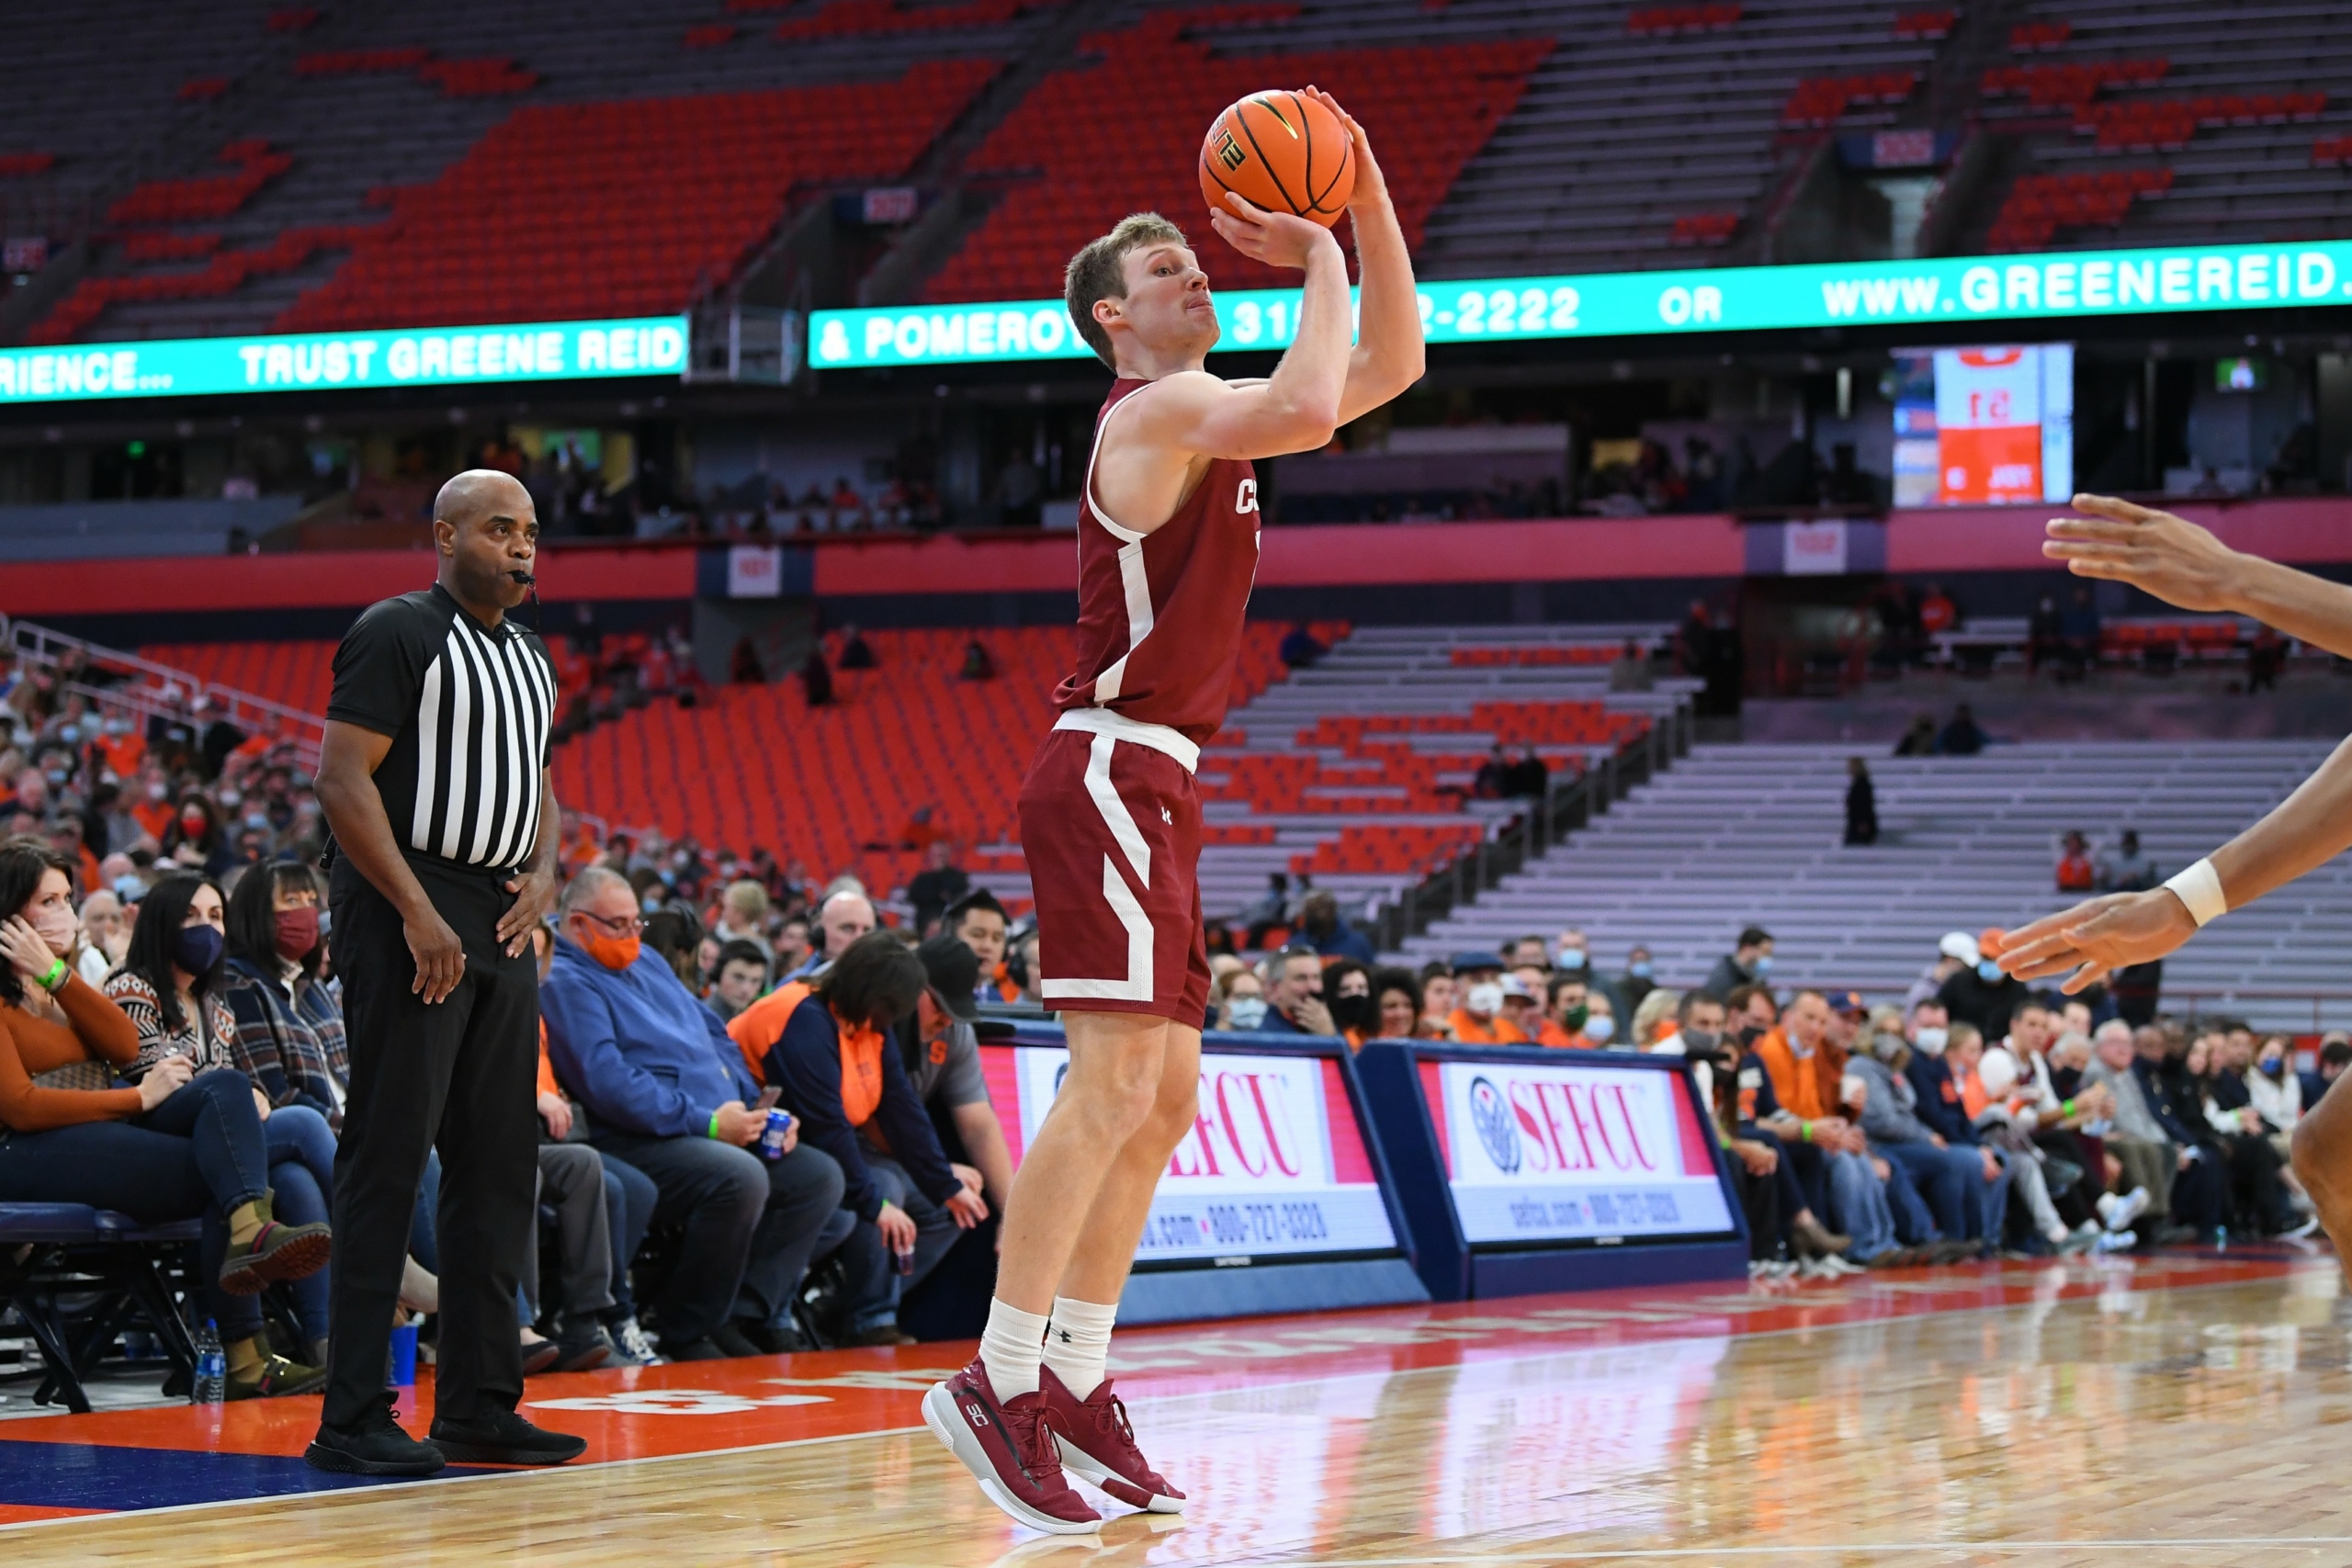 Colgate basketball player Tucker Richardson shoots a three pointer as fans watch the game.